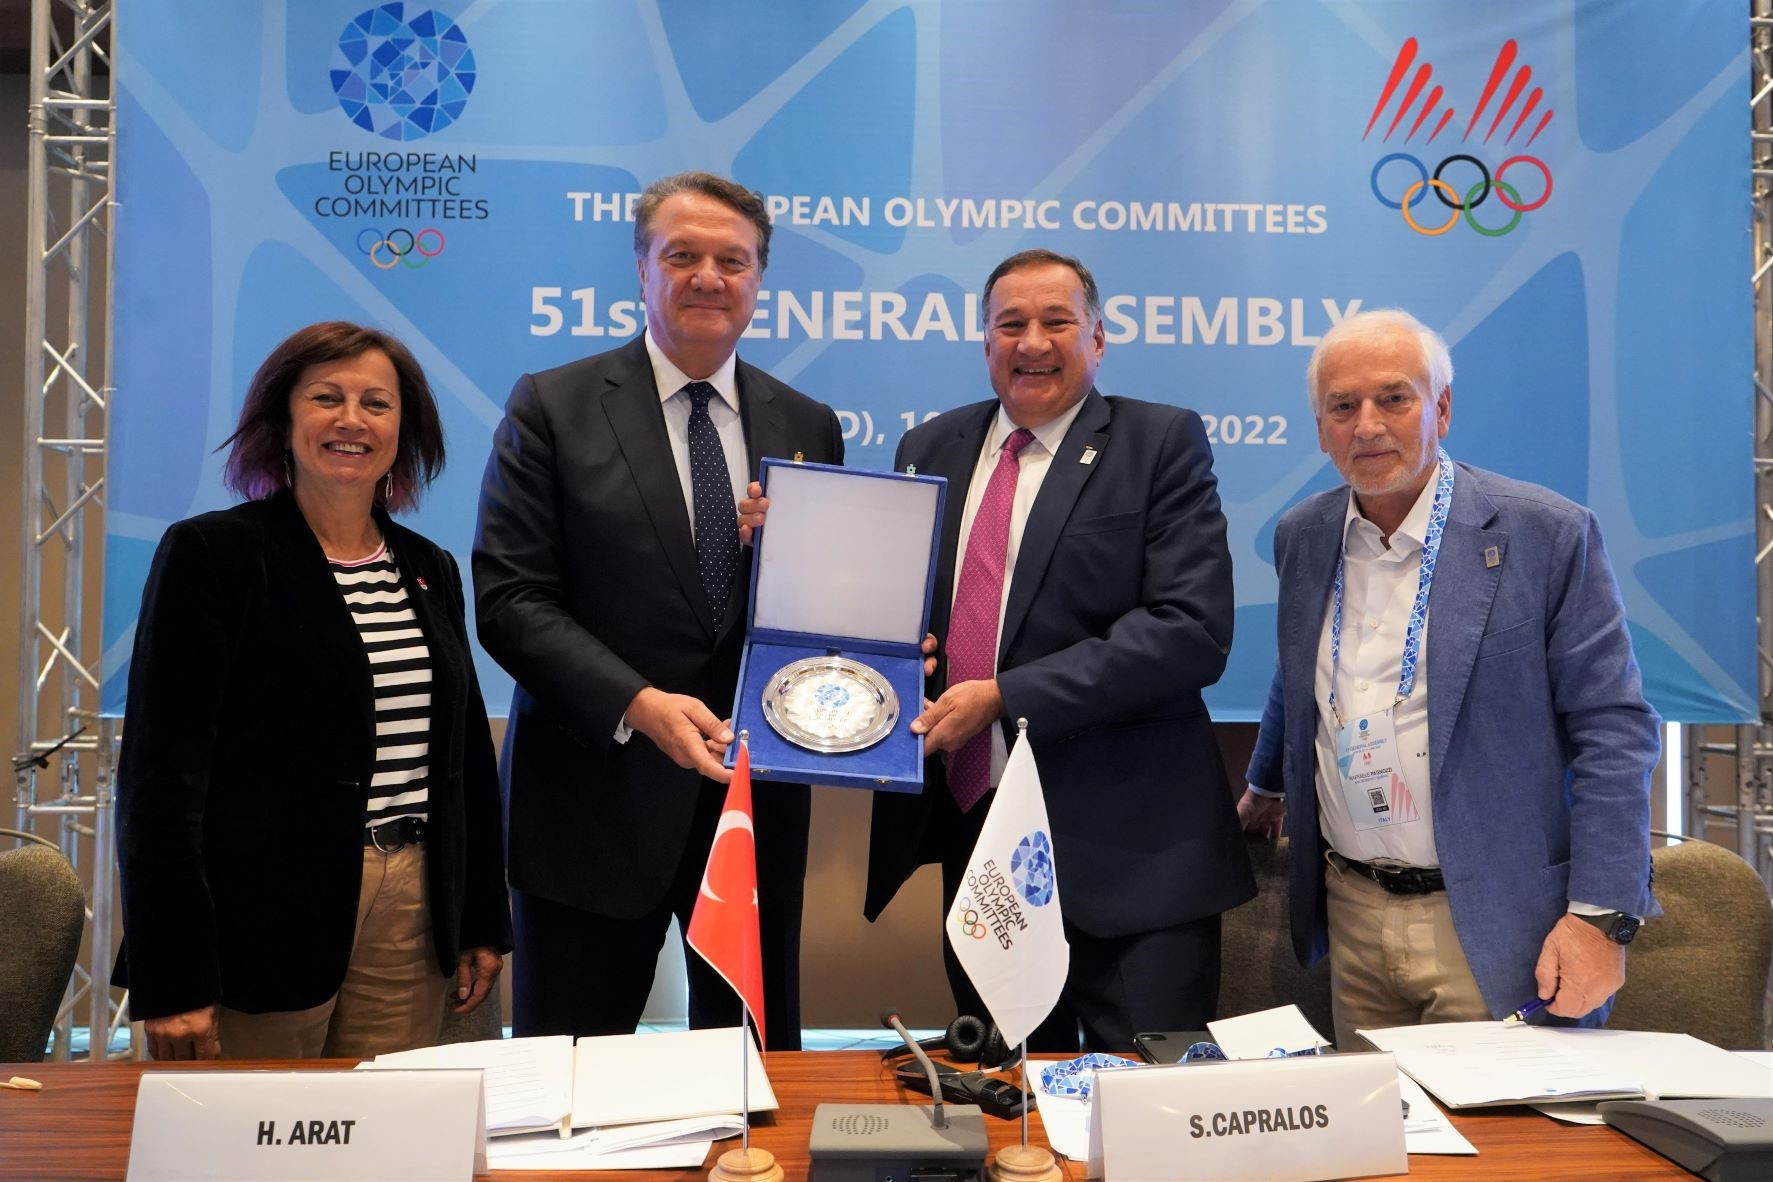 Turkey confirmed as next EOC General Assembly host in October 2023